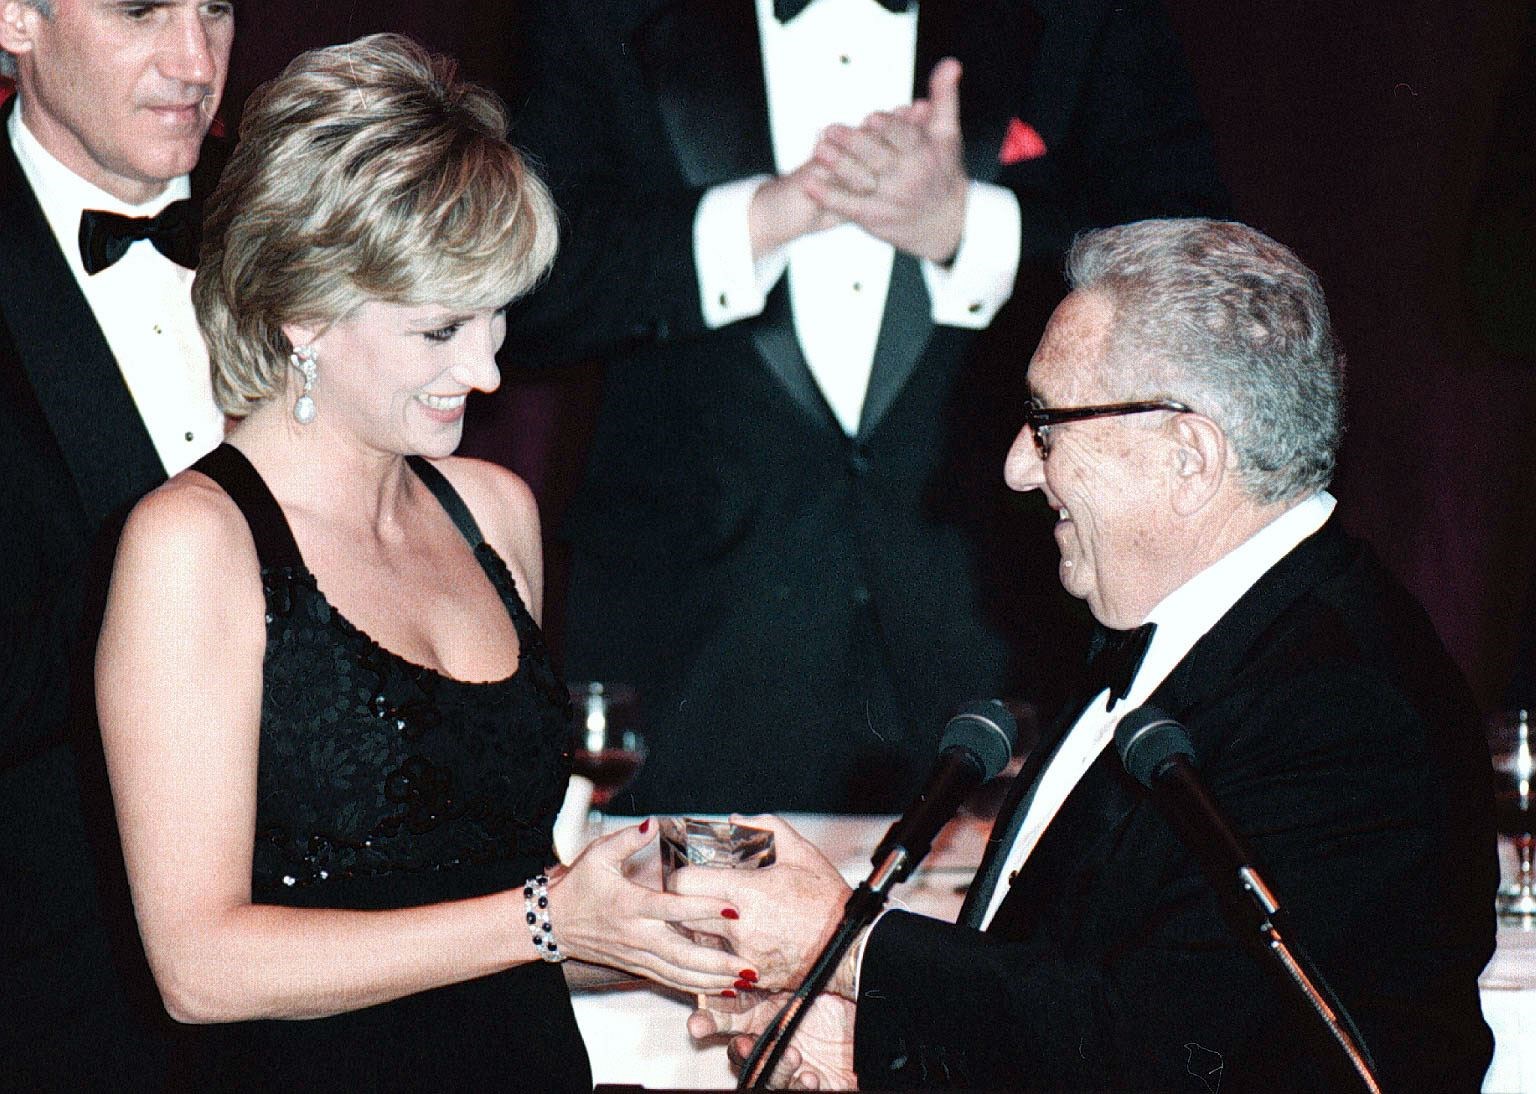 The late Diana, Princess of Wales receiving a humanitarian award from Mr Kissinger in December 1995 (PA)